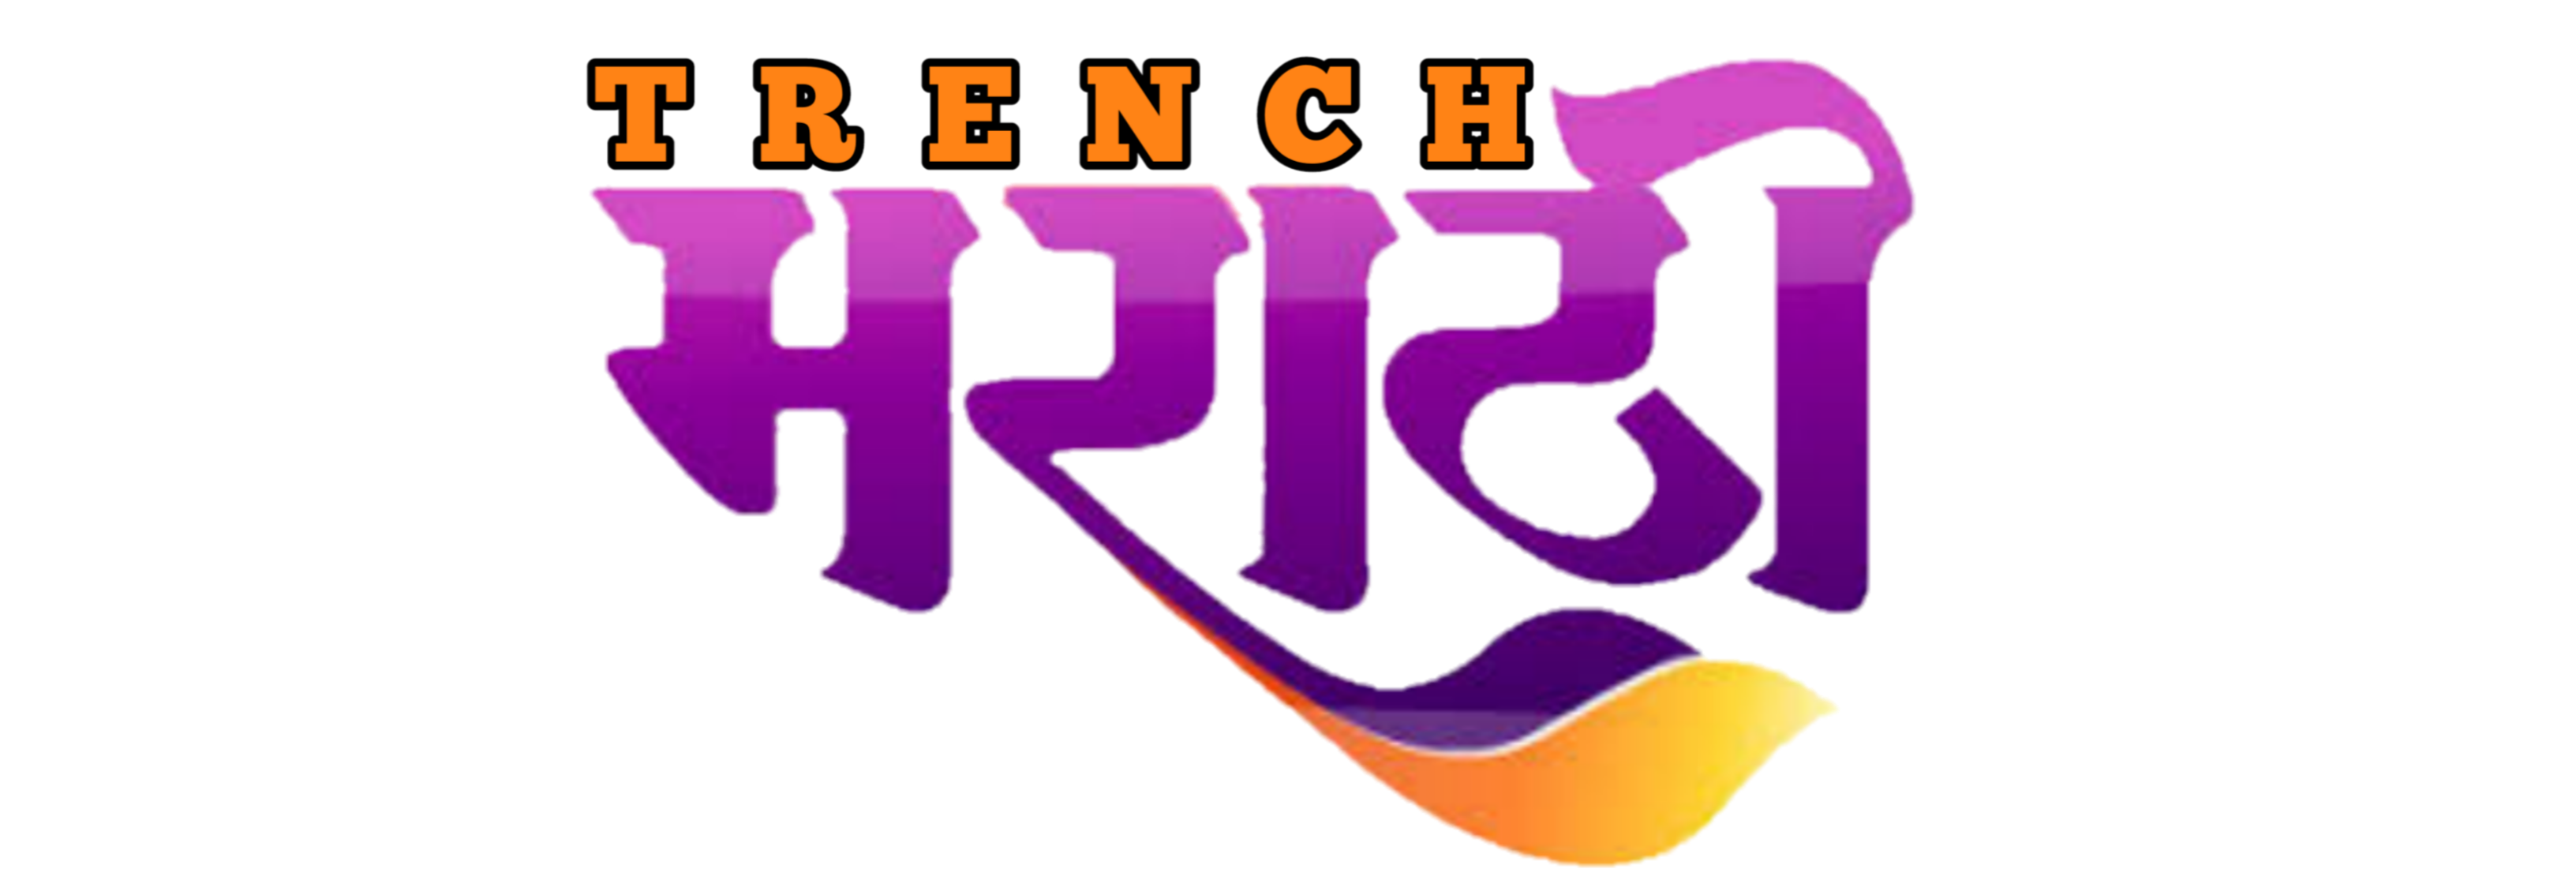 About Us - Trench Marathi